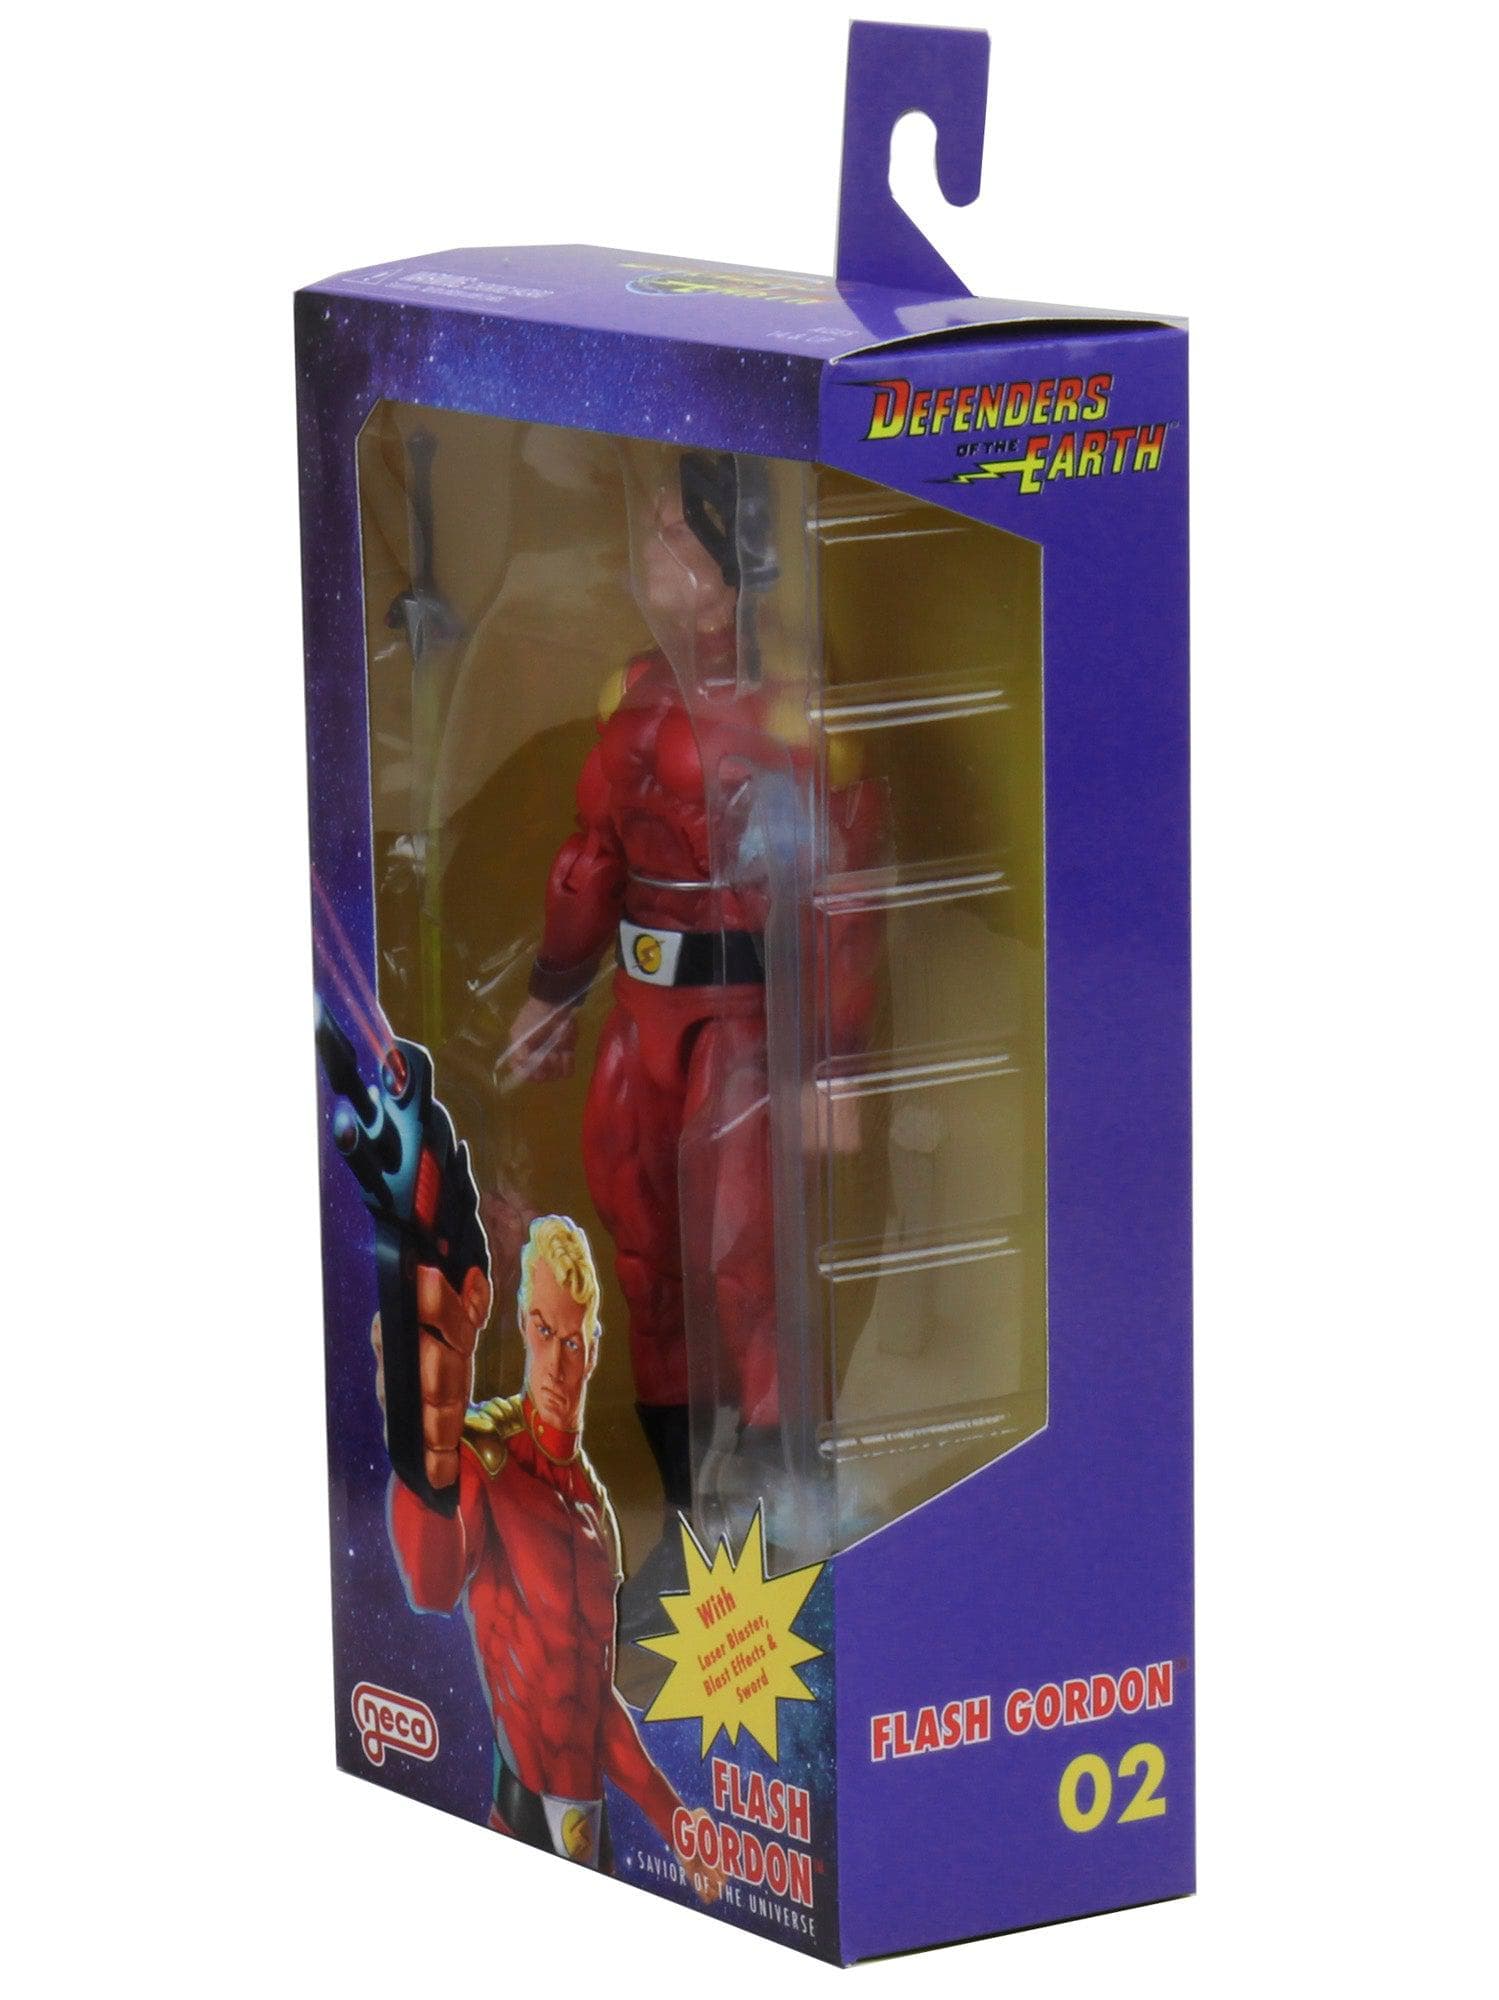 NECA - King Features - 7" Scale Action Figure - Defenders of the Earth Series Flash Gordon - costumes.com